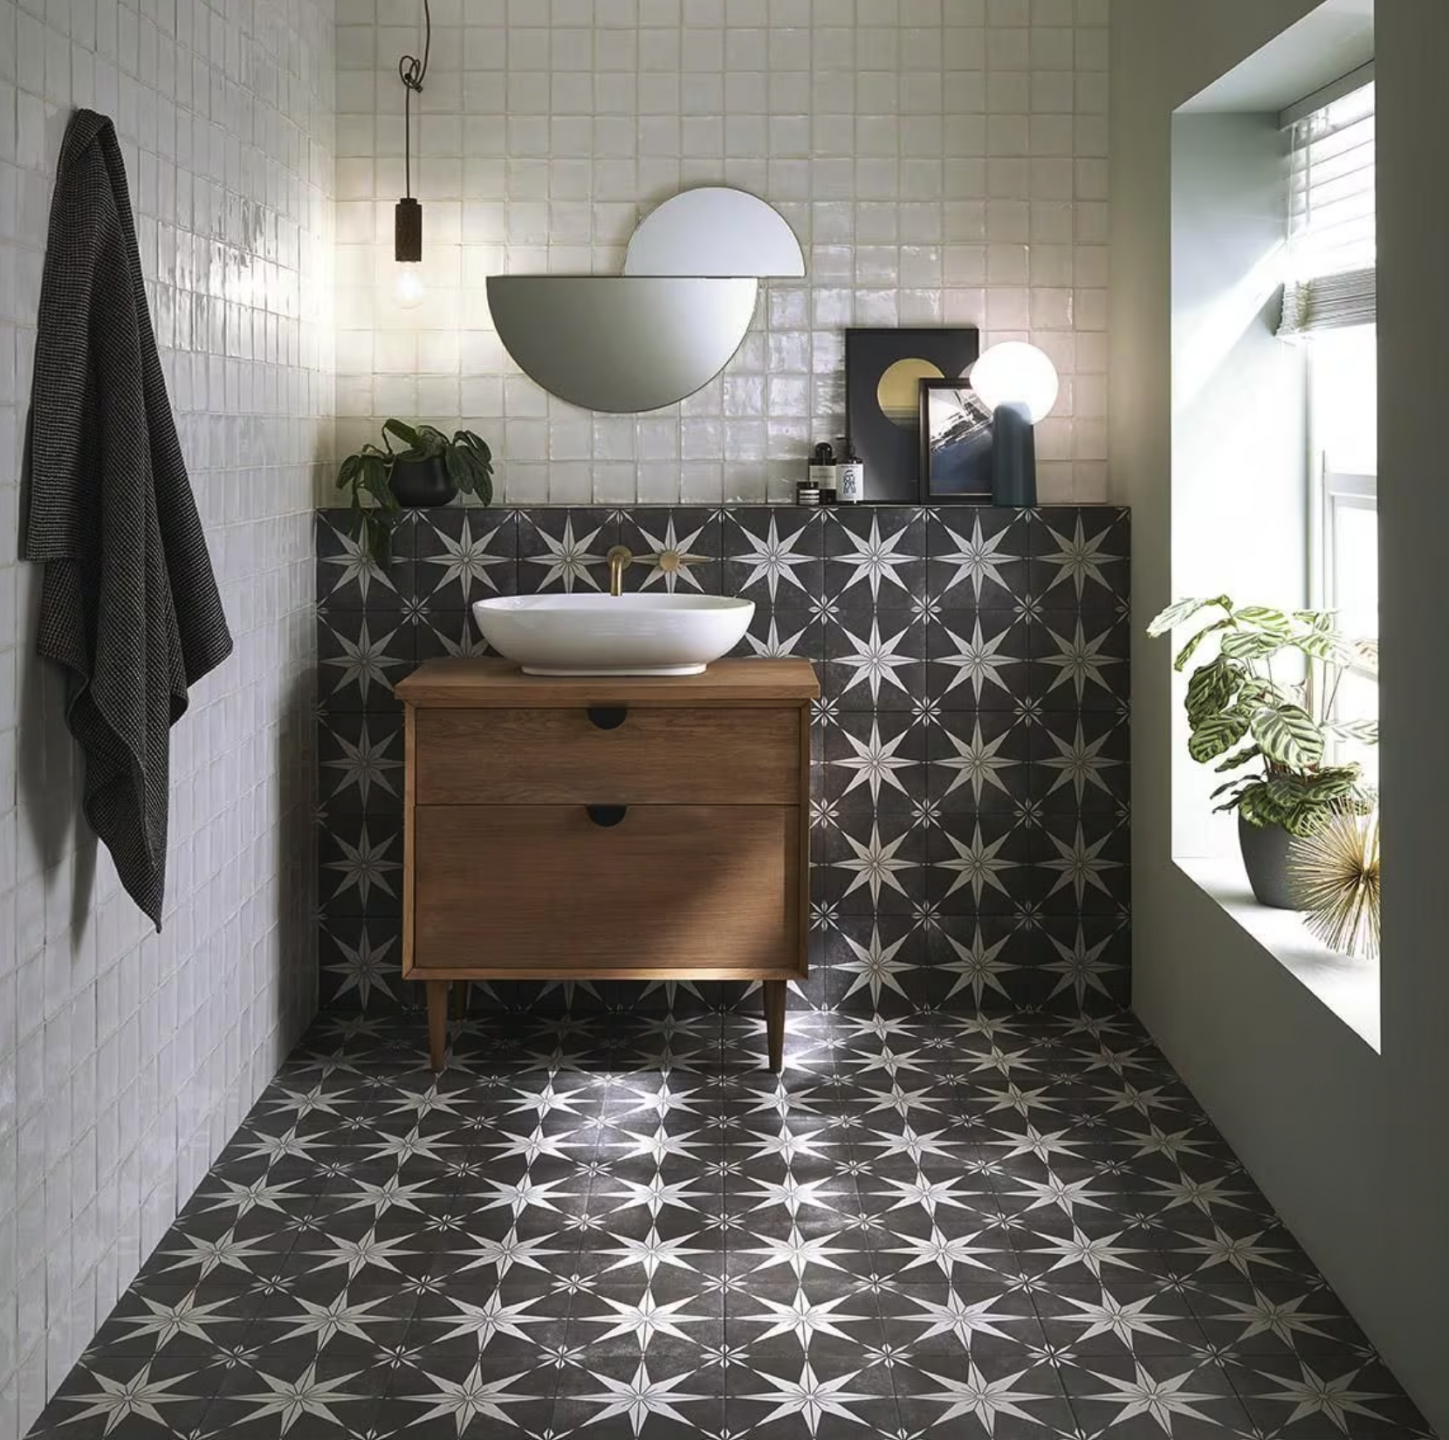 Black and white bathroom décor ideas to transform your space